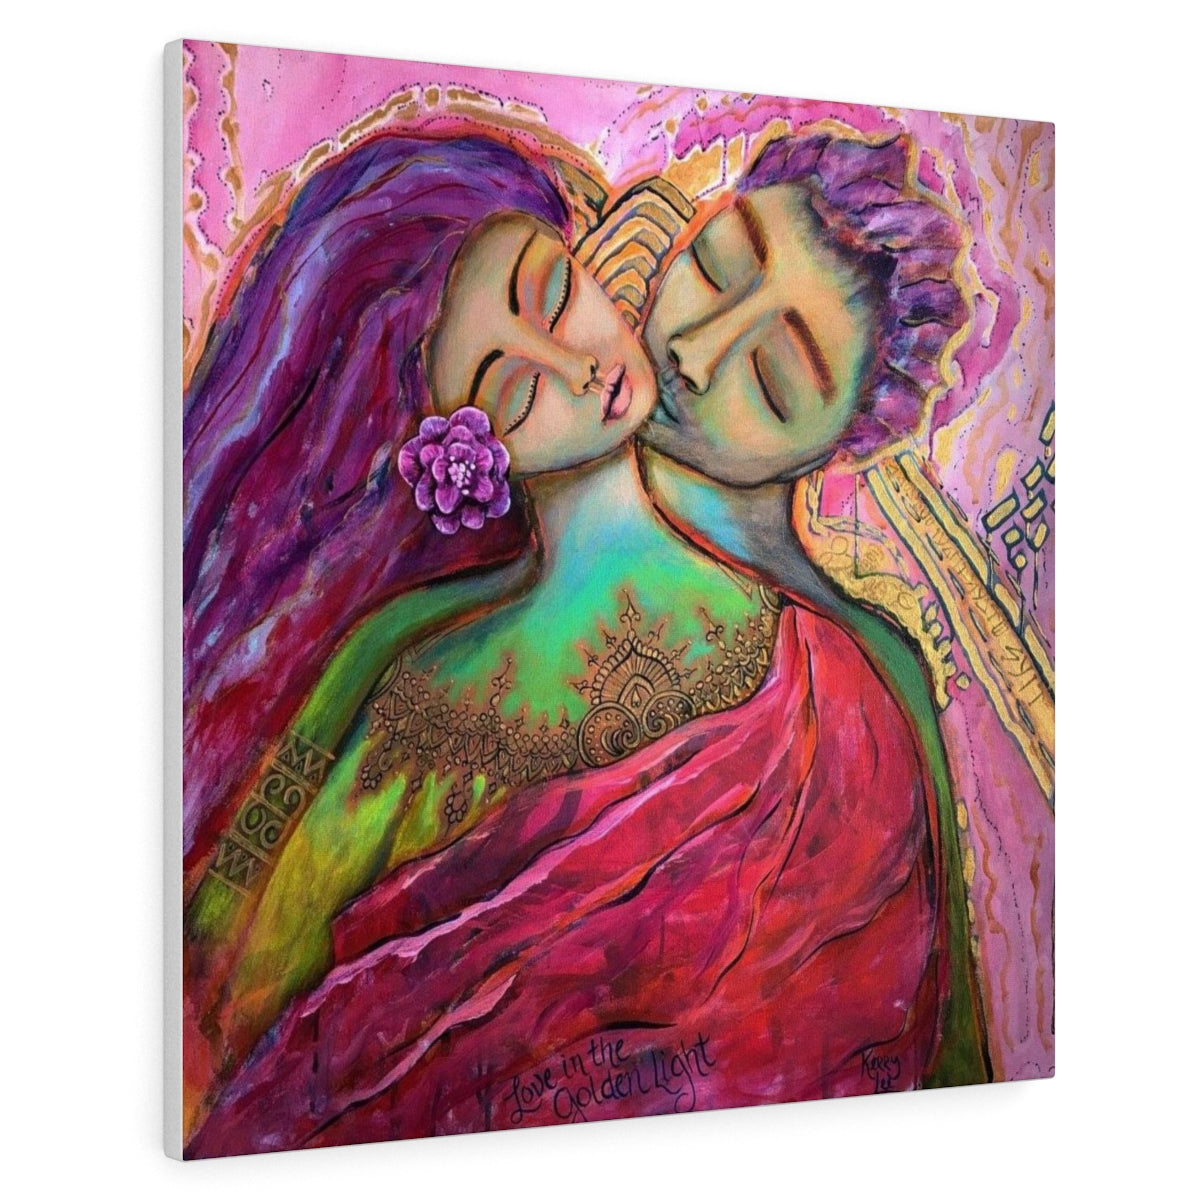 Love In The Golden Light - Original Painting 36x36" Acrylic on Canvas - SOLD